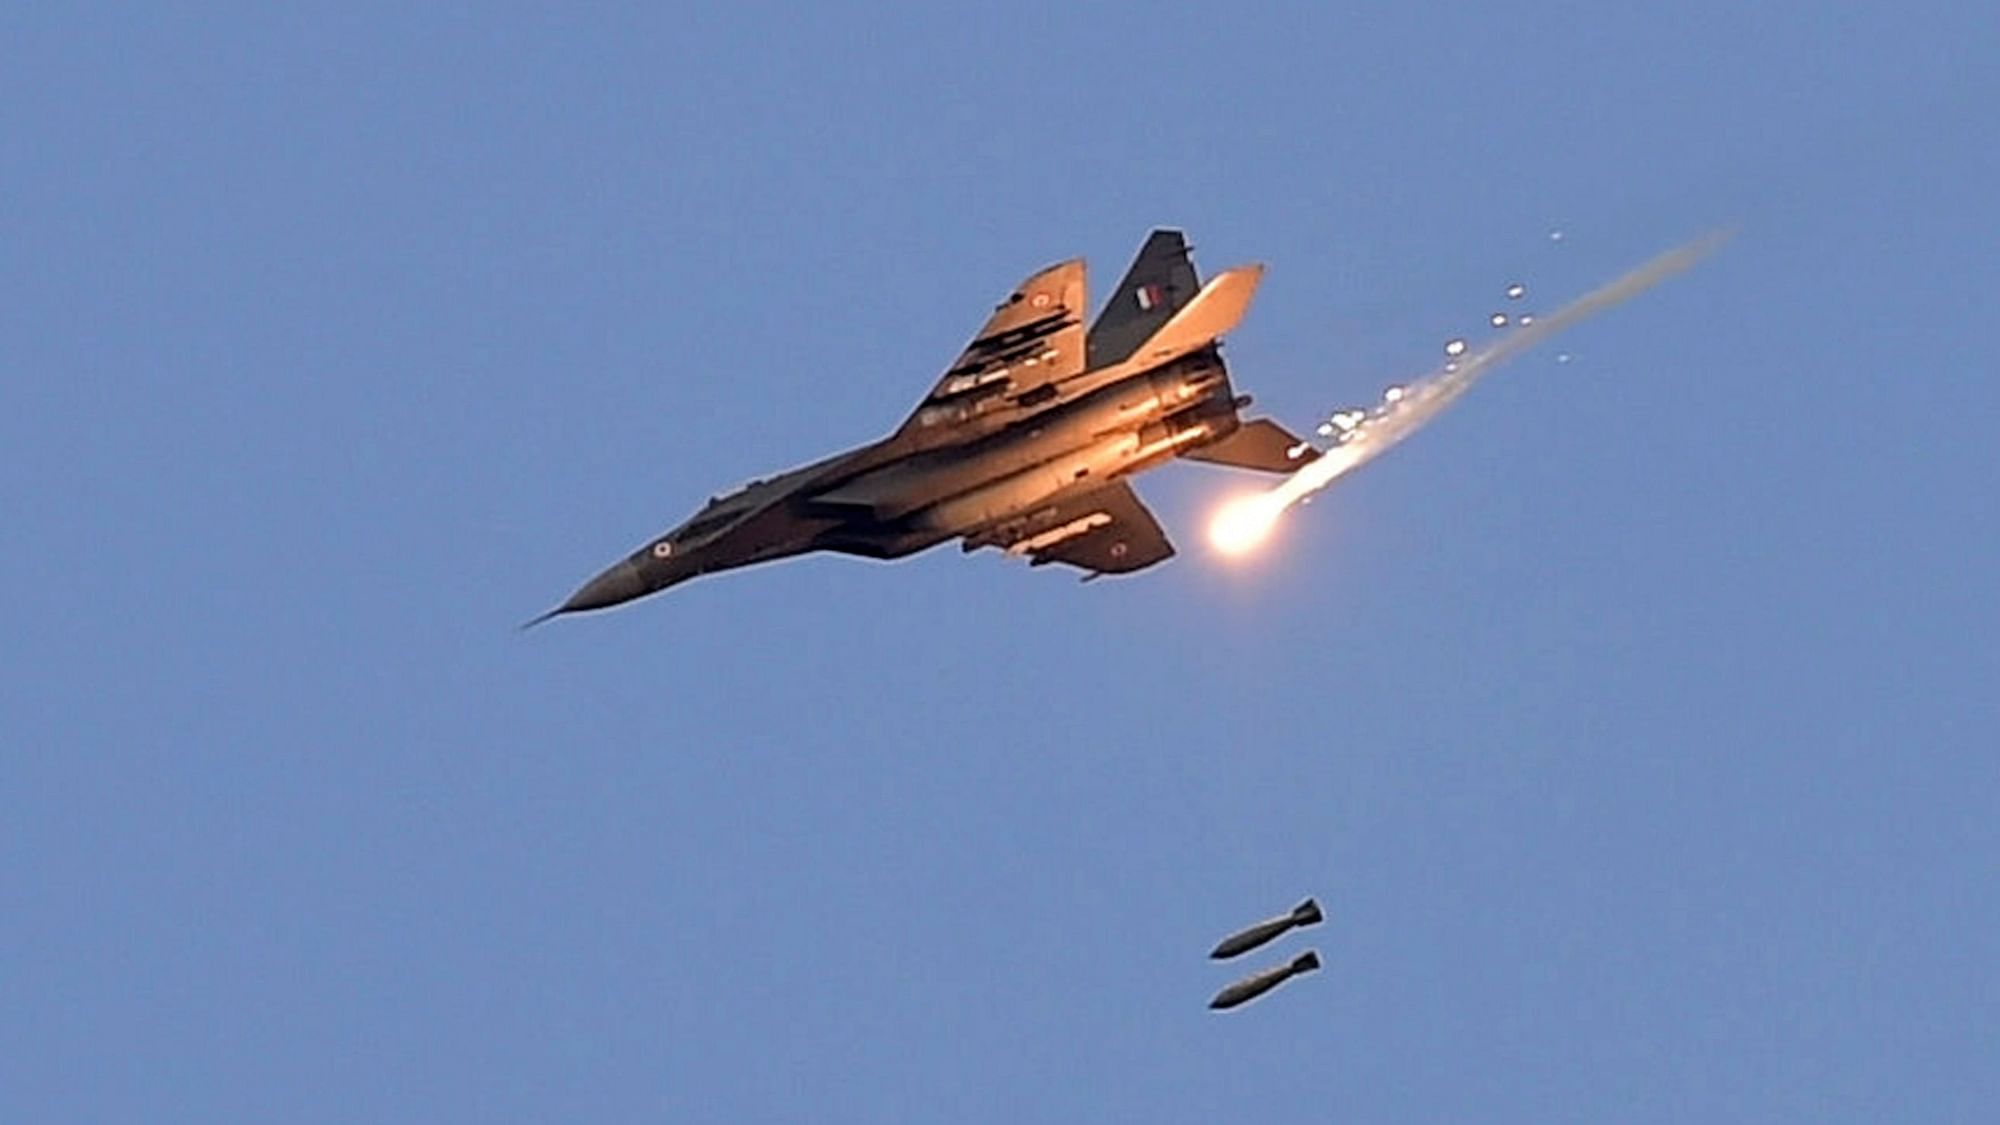 An Indian Air Force (IAF) MIG 29 releases bombs during an IAF exercise named ,” Vayu Shakti 2019” at the Air Force field firing range of Pokhran ,Rajasthan.